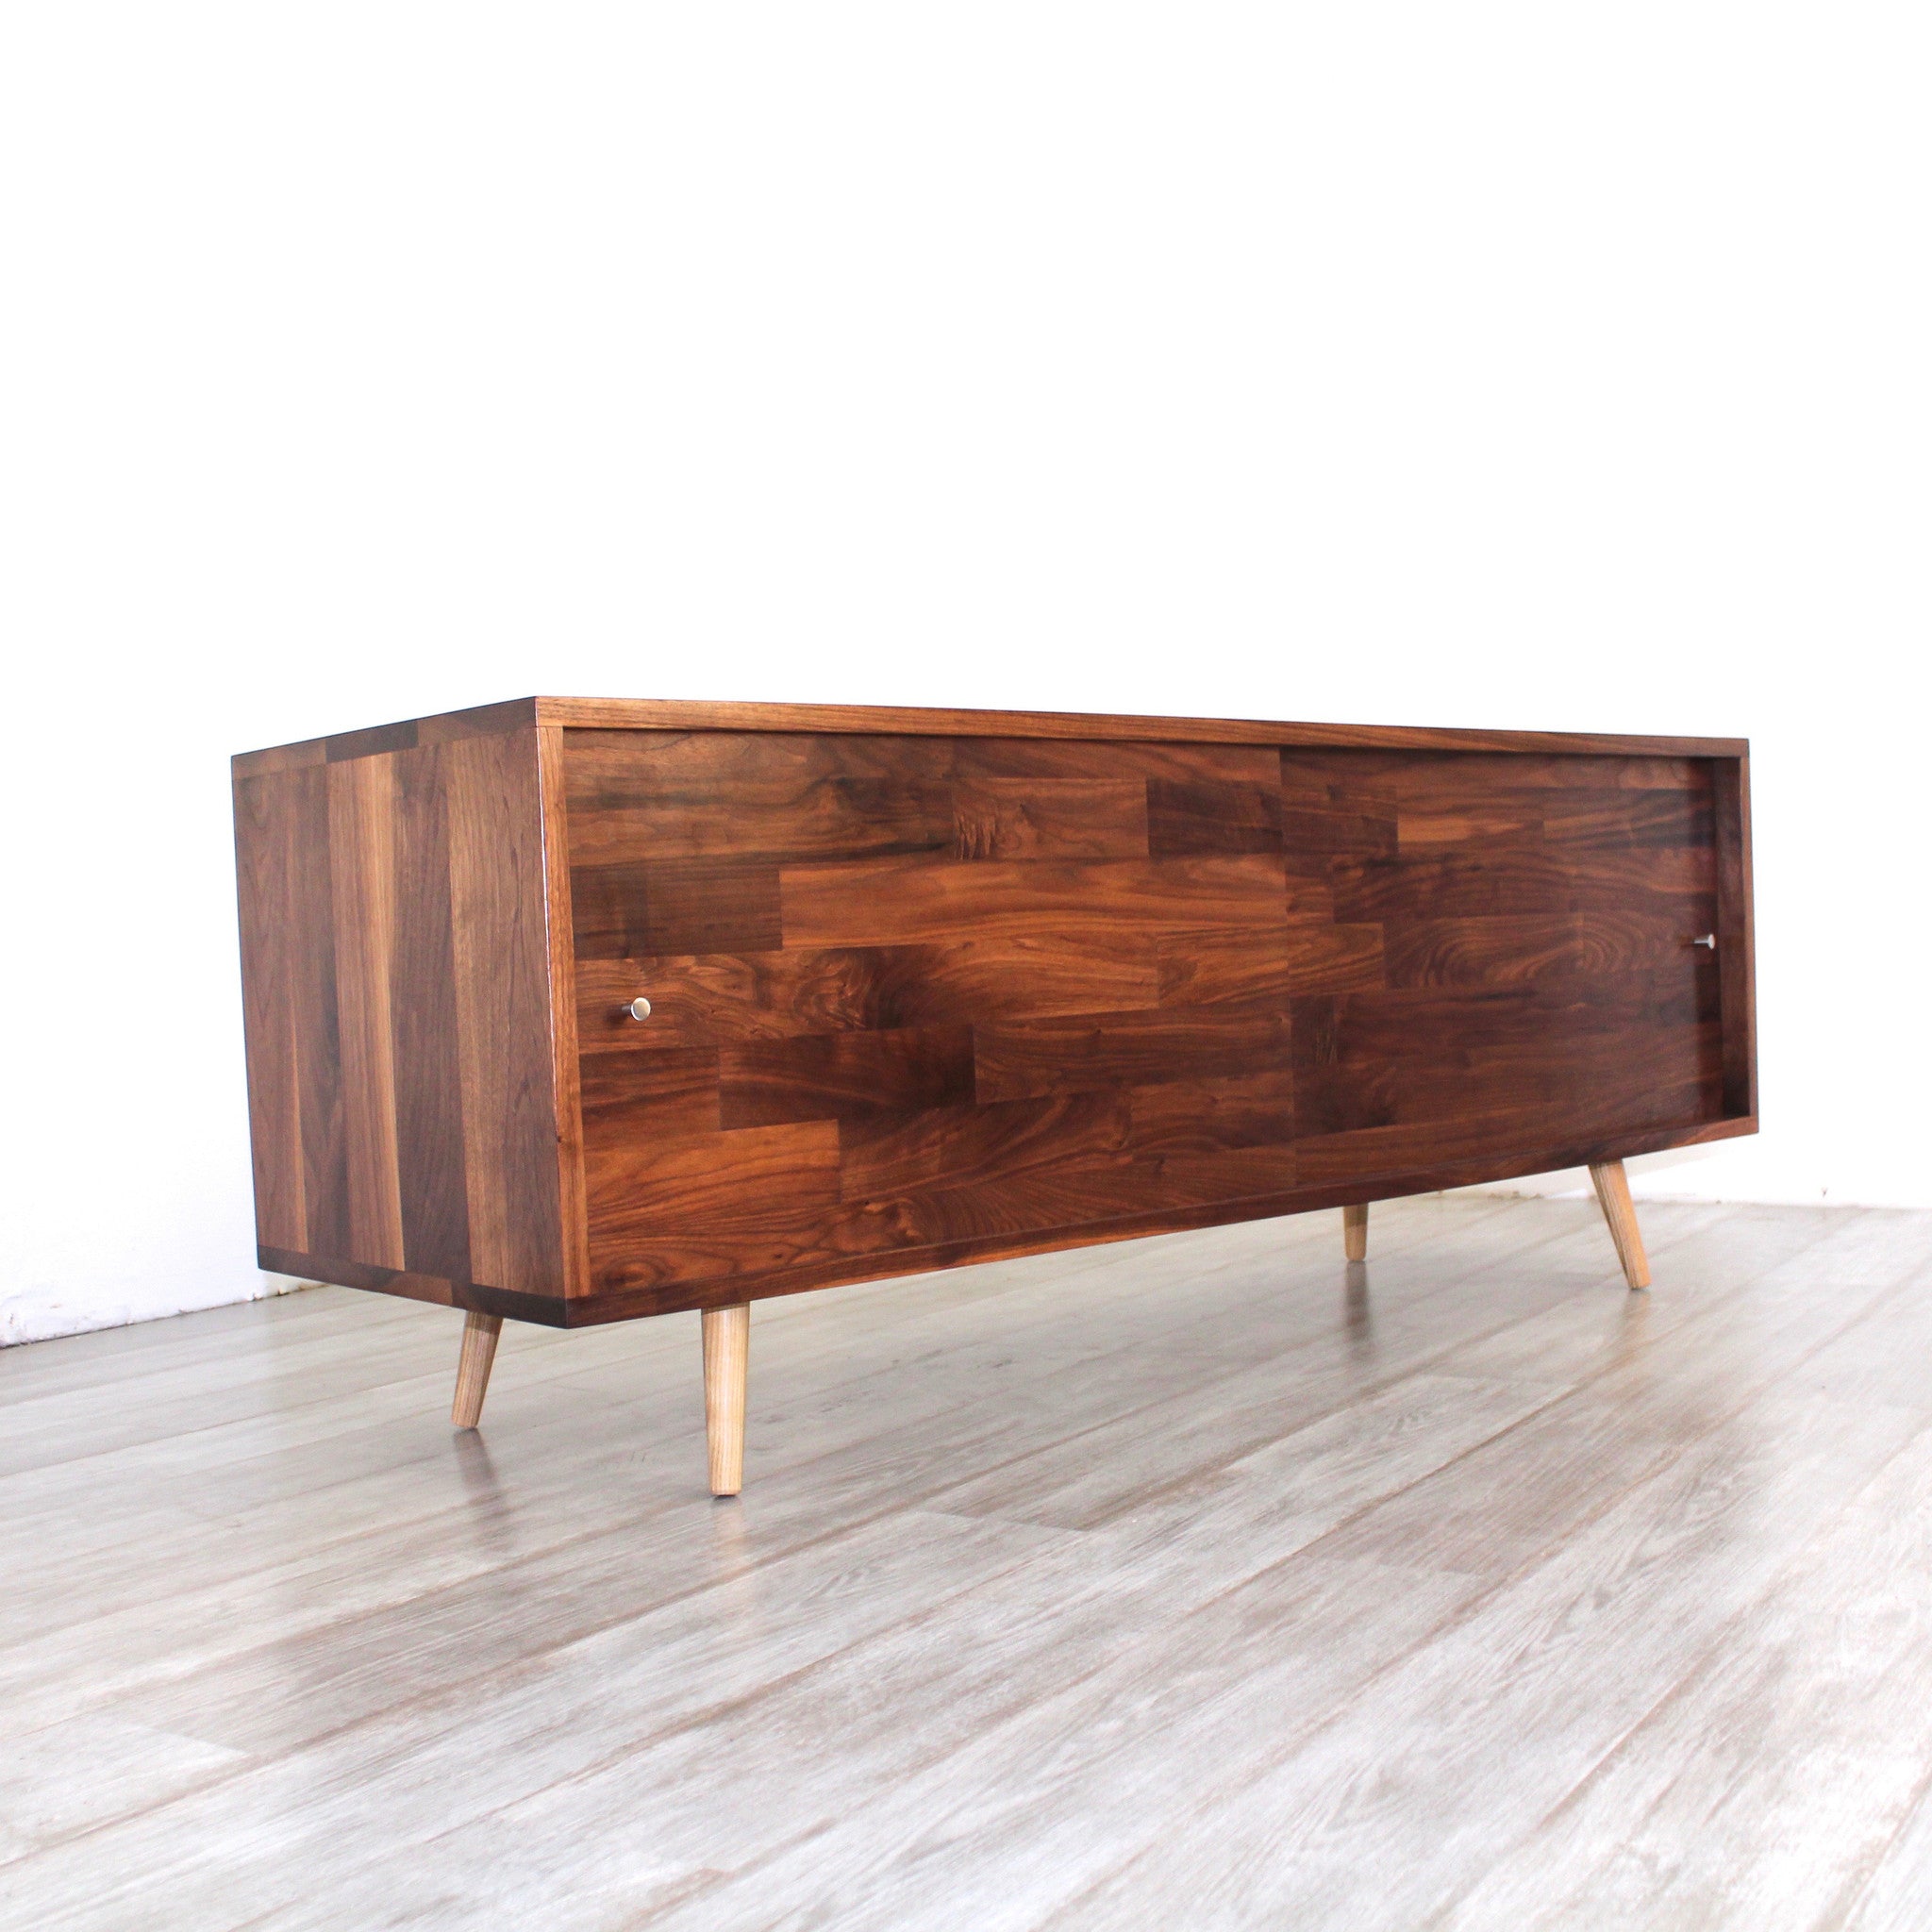 Low Walnut Mid Century Media Console - JeremiahCollection - 3